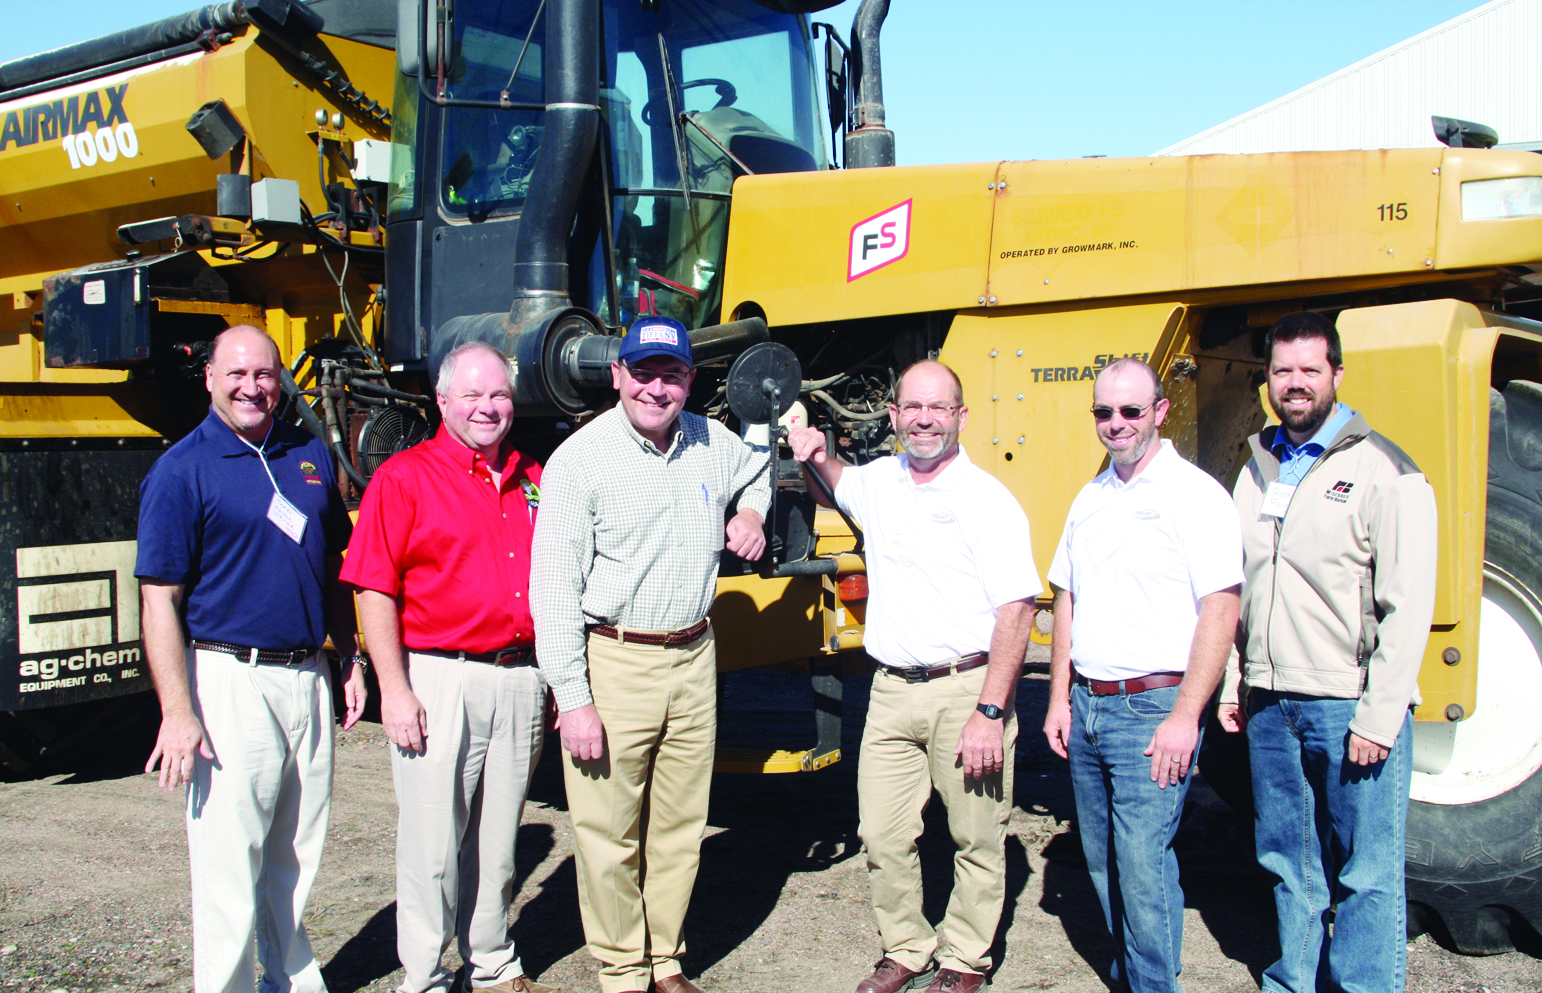 Shown during the agribusiness tour at Insight FS Thursday are, from left, Tamas Houlihan, executive director of the<br />
Wisconsin Potato and Vegetable Growers Association, Tom Bressner, executive director of the Wisconsin Agri-Business<br />
Association, State Senator Tom Tiffany, and Joel Zalewski, Mike Dailey and David Ward of Insight FS.